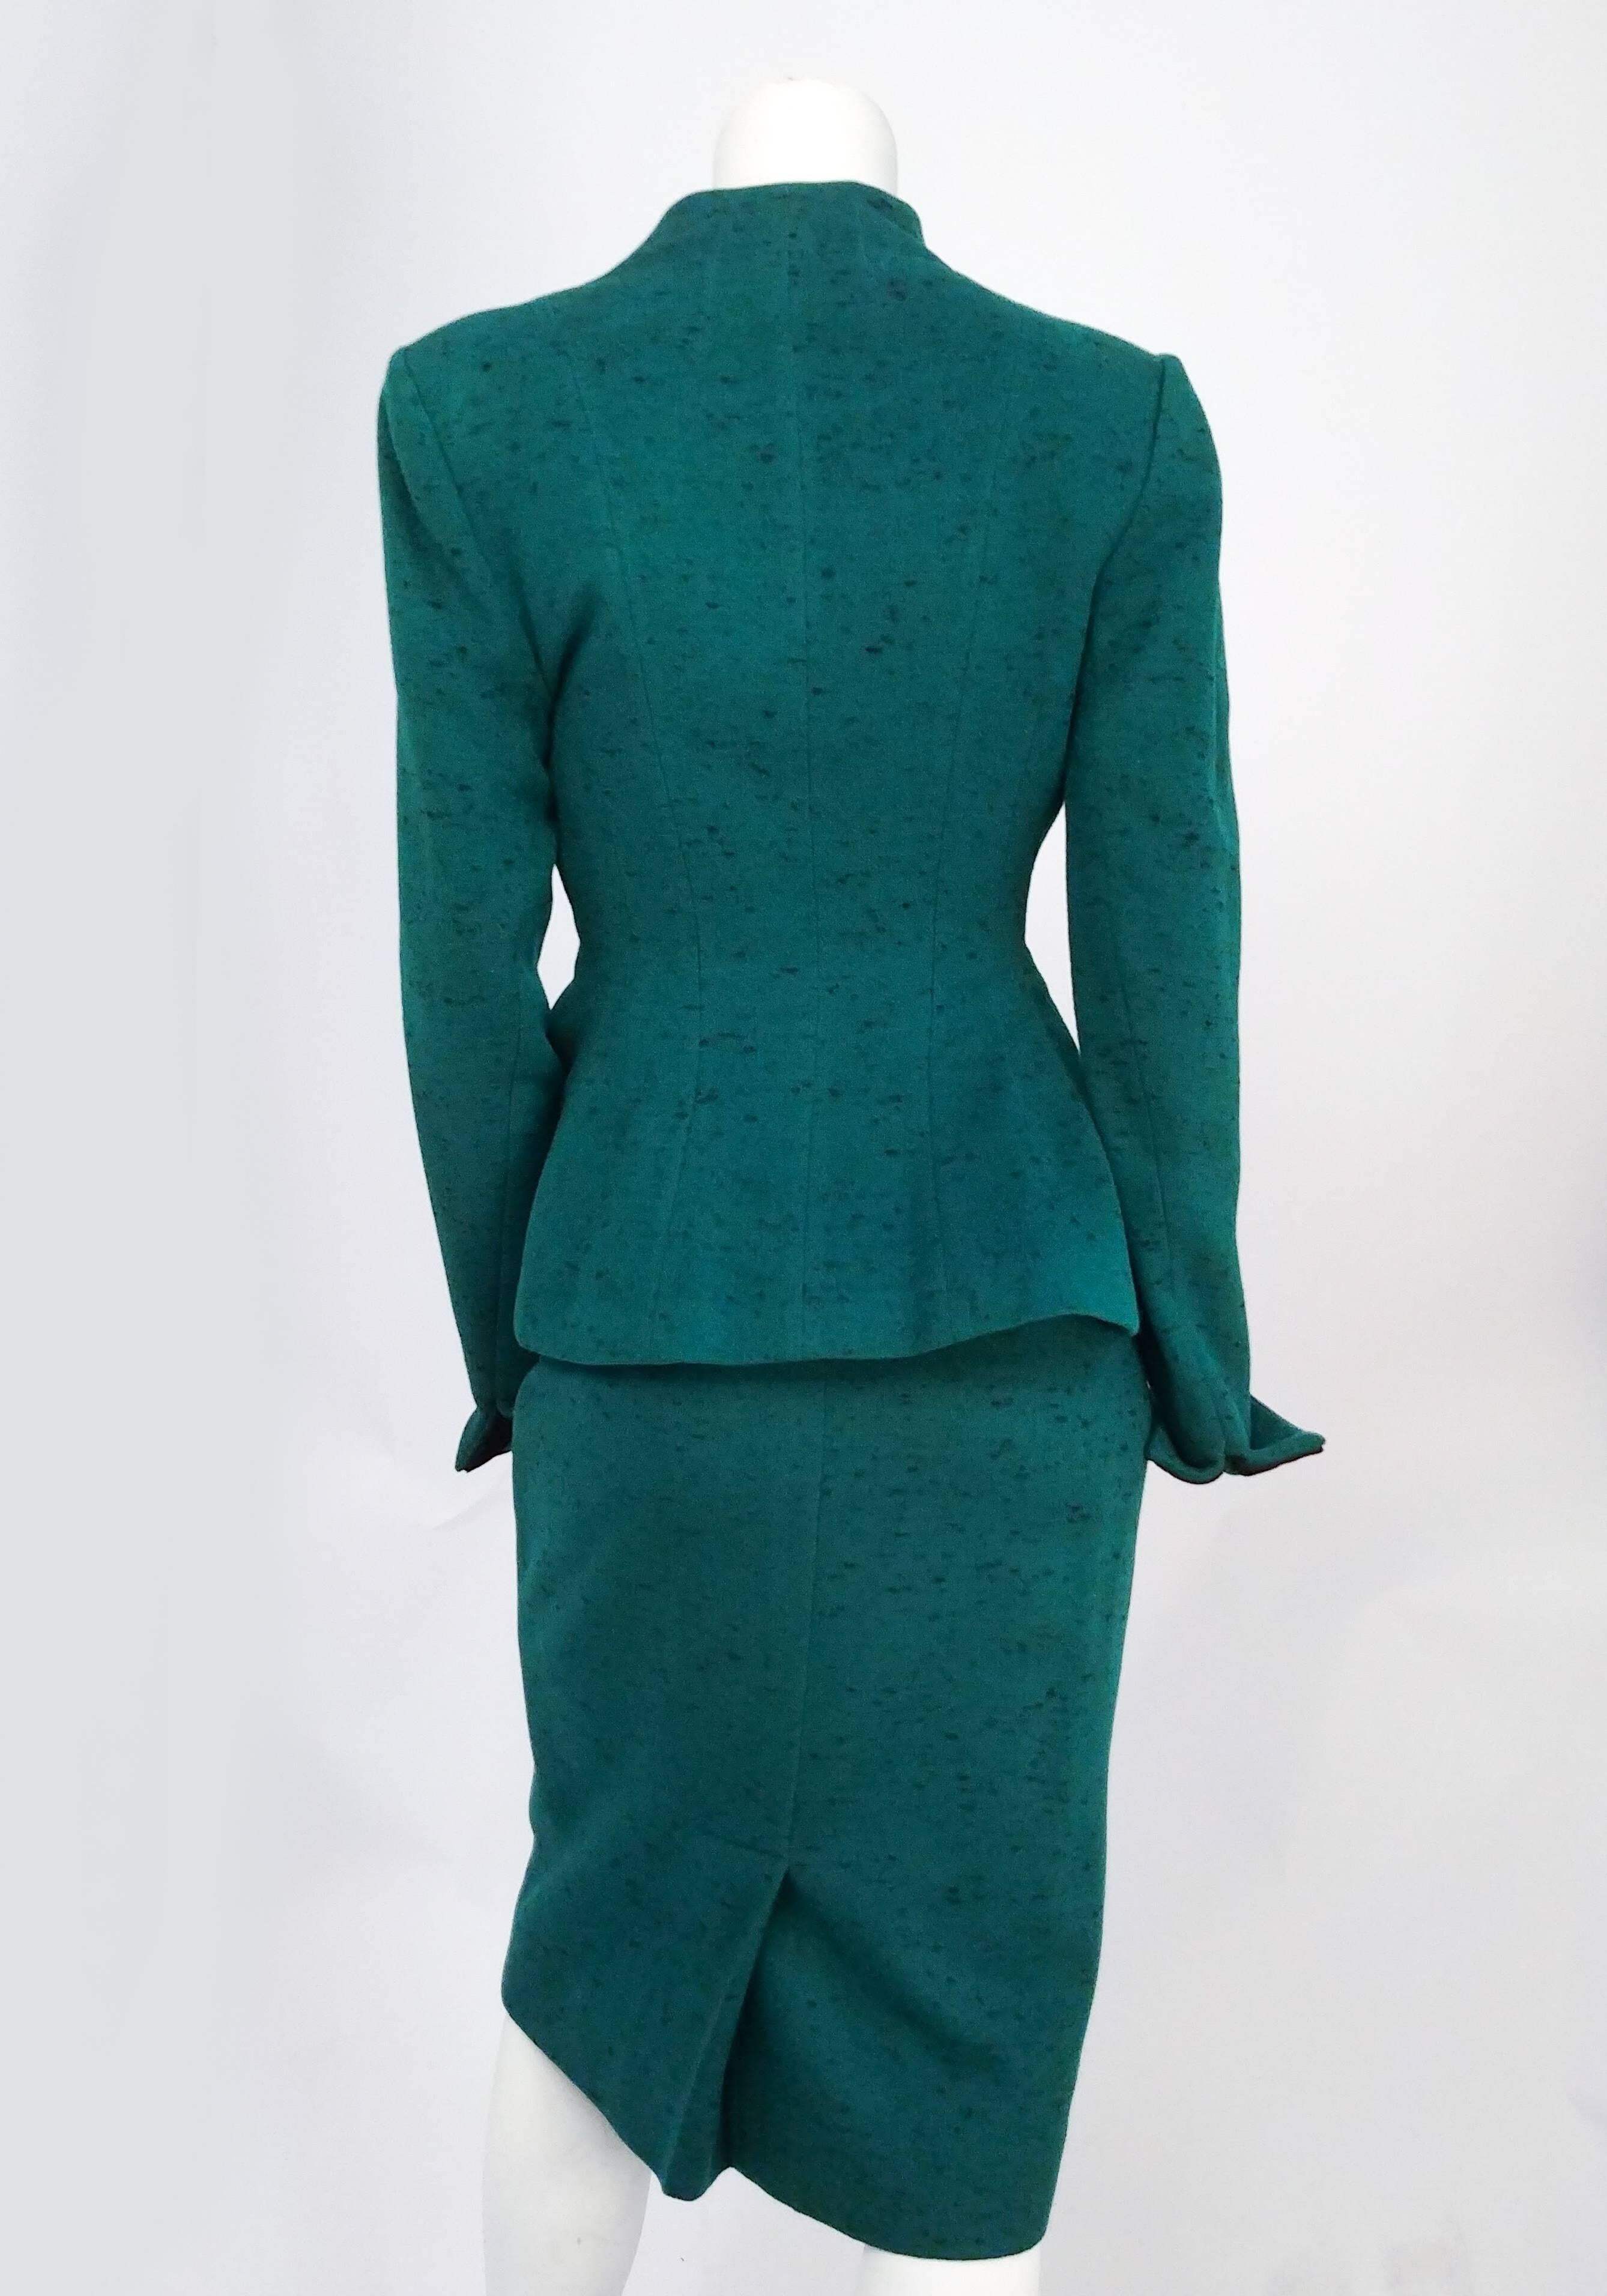 peacock green suit